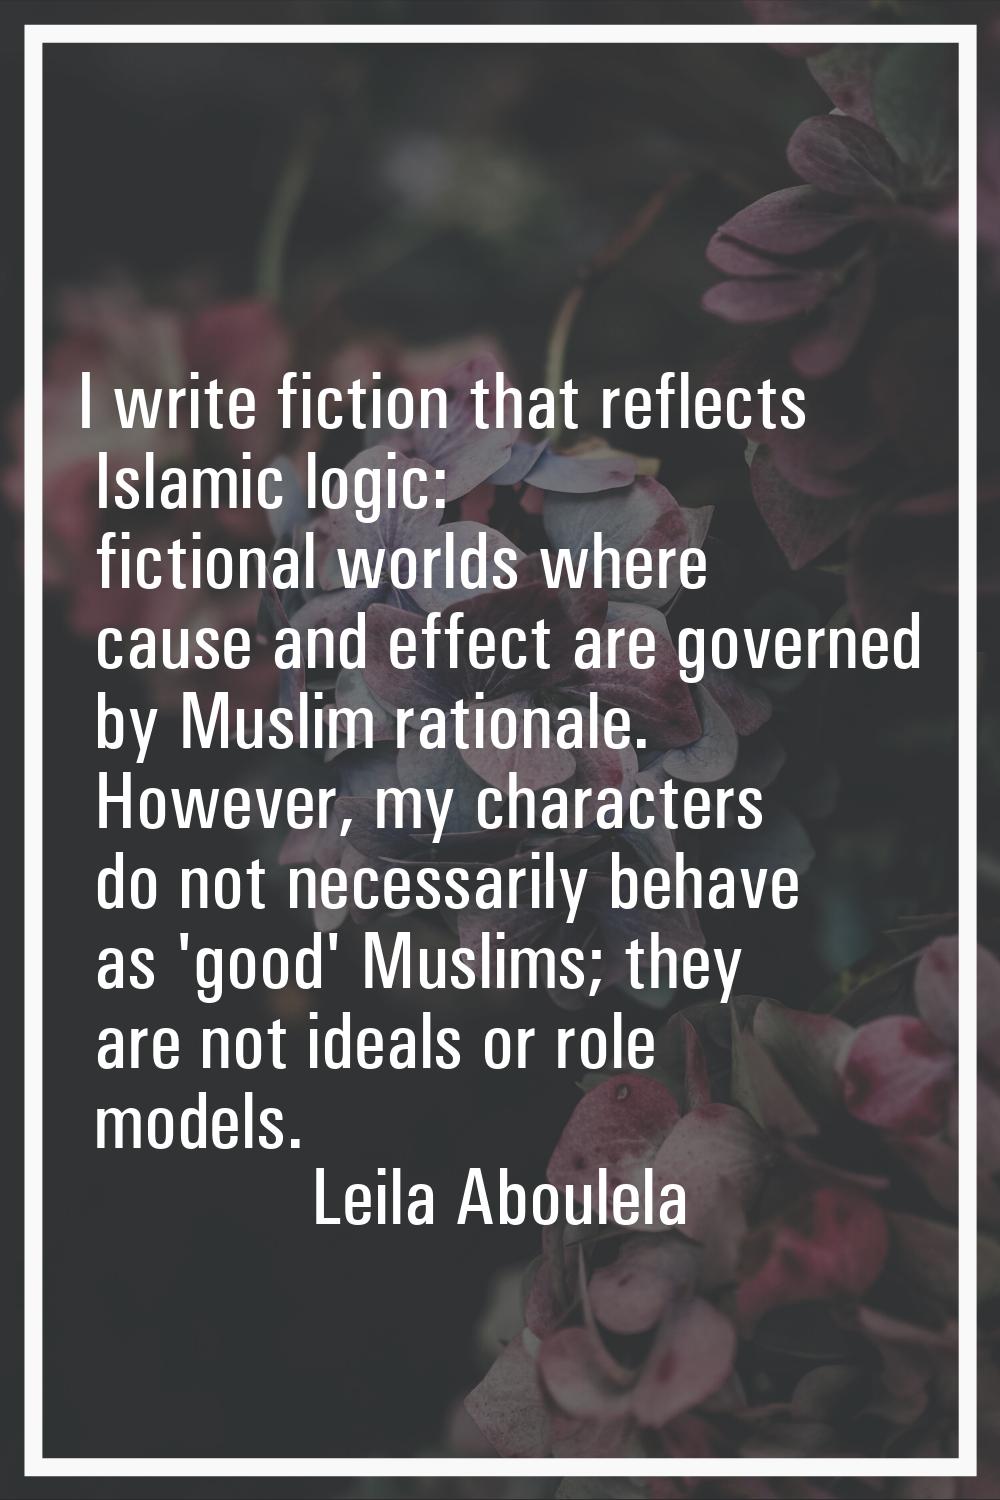 I write fiction that reflects Islamic logic: fictional worlds where cause and effect are governed b